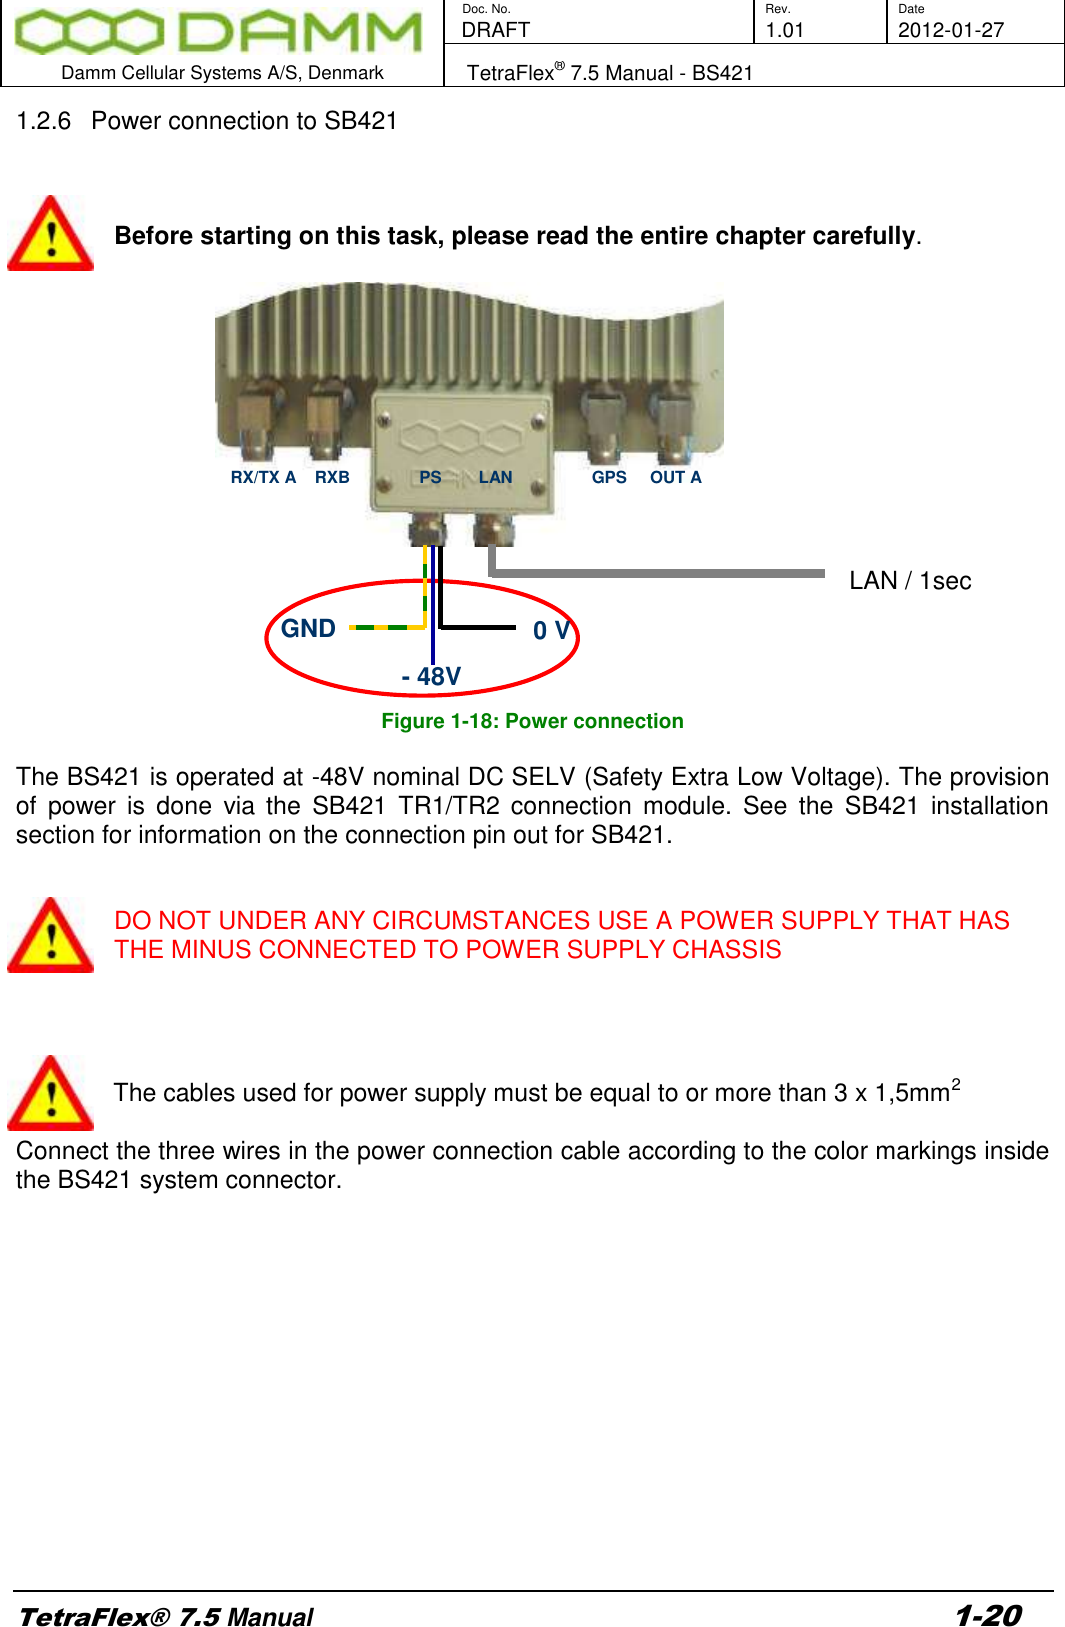        Doc. No. Rev. Date    DRAFT  1.01 2012-01-27  Damm Cellular Systems A/S, Denmark   TetraFlex® 7.5 Manual - BS421  TetraFlex® 7.5 Manual 1-20 1.2.6  Power connection to SB421    Before starting on this task, please read the entire chapter carefully.                                                                                                                                    LAN / 1sec     Figure 1-18: Power connection  The BS421 is operated at -48V nominal DC SELV (Safety Extra Low Voltage). The provision of  power  is  done  via  the  SB421  TR1/TR2  connection  module.  See  the  SB421  installation section for information on the connection pin out for SB421.   DO NOT UNDER ANY CIRCUMSTANCES USE A POWER SUPPLY THAT HAS THE MINUS CONNECTED TO POWER SUPPLY CHASSIS     The cables used for power supply must be equal to or more than 3 x 1,5mm2   Connect the three wires in the power connection cable according to the color markings inside the BS421 system connector.         GND 0 V - 48V RX/TX A    RXB               PS        LAN                 GPS     OUT A 